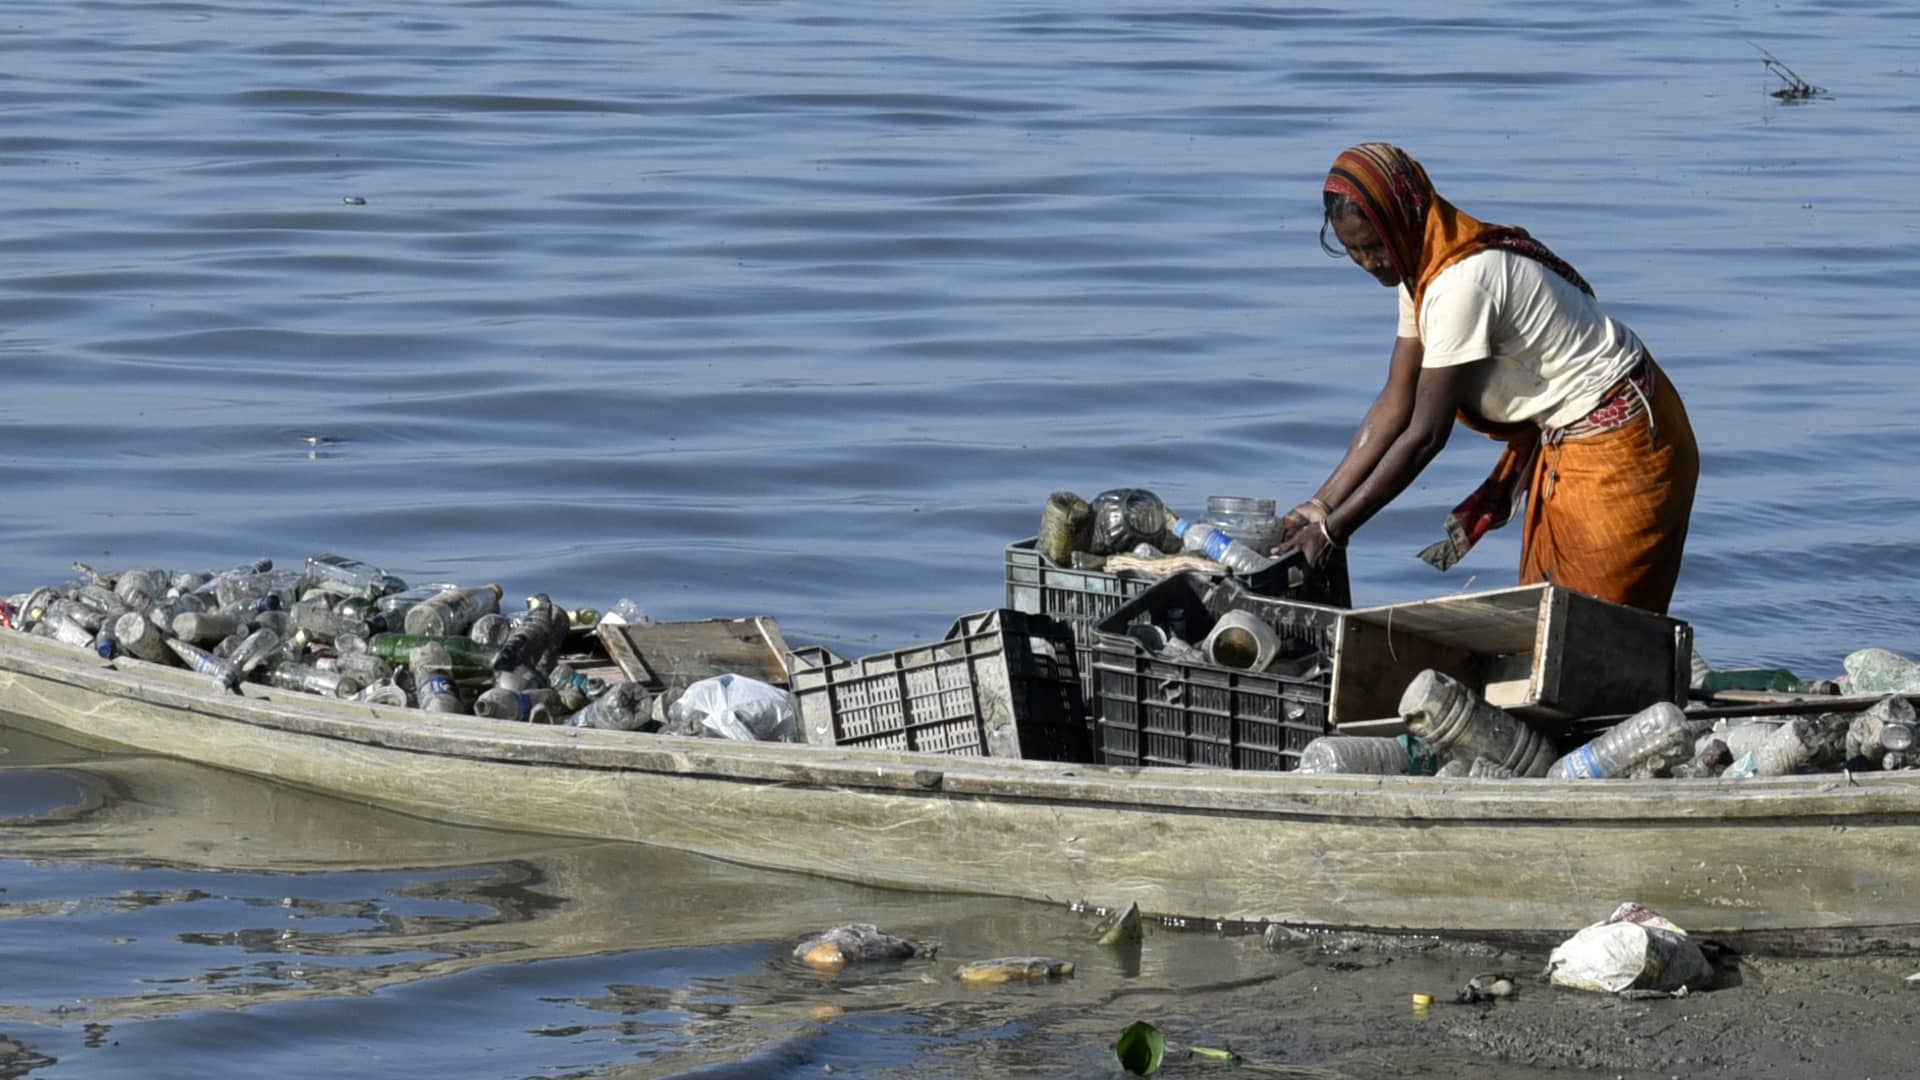 A women rag picker collecting plastic bottle and other plastic materials in a boat from the bank of Brahmaputra River in Guwahati, Assam, India on Monday, October 29, 2018.